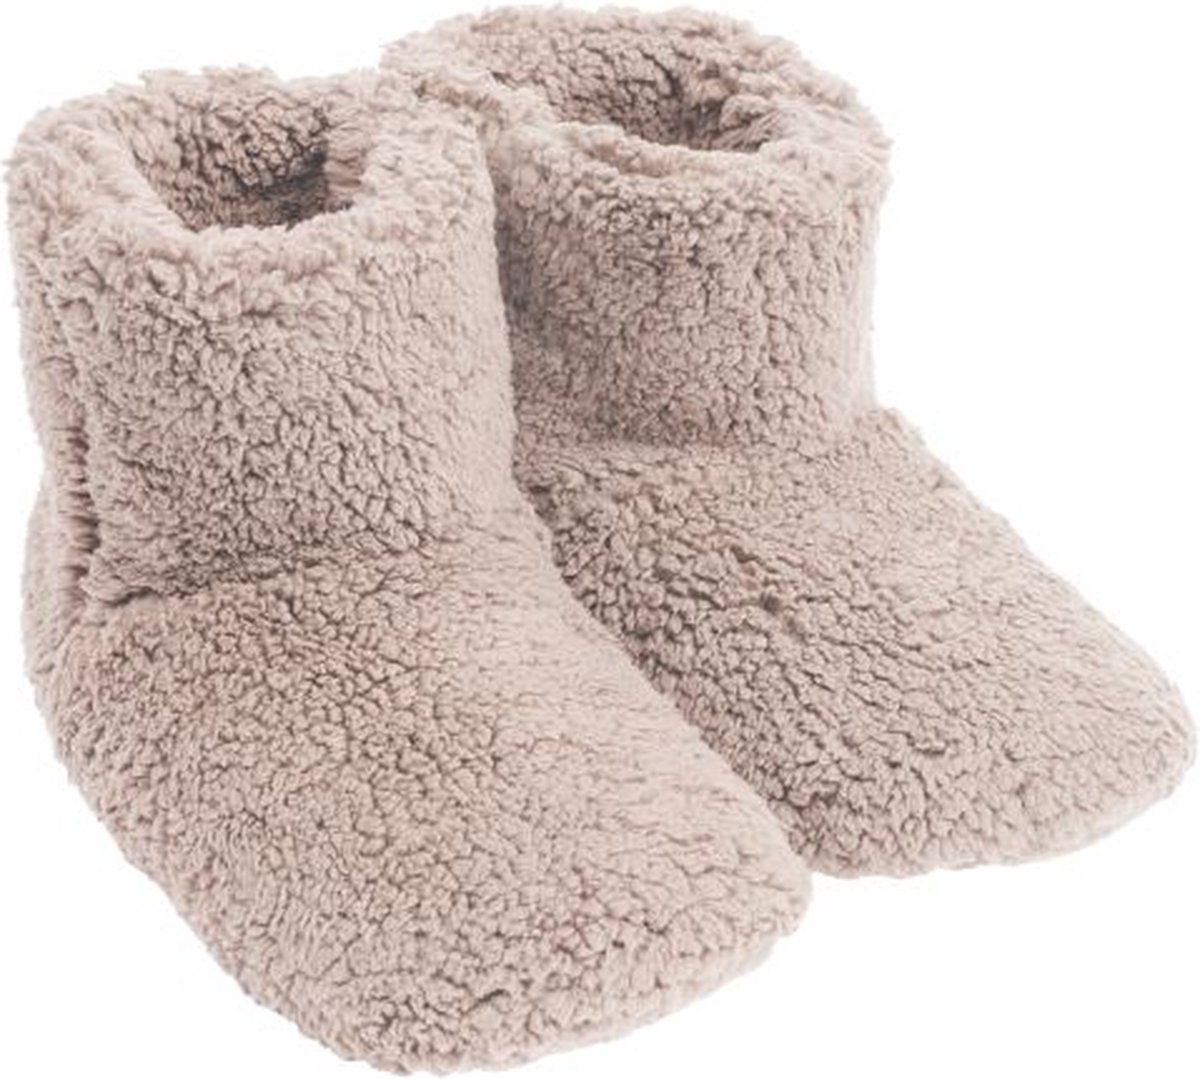 Mistral Home - Pantoffels boots teddy - maat 36/37 - 100% polyester - Beige